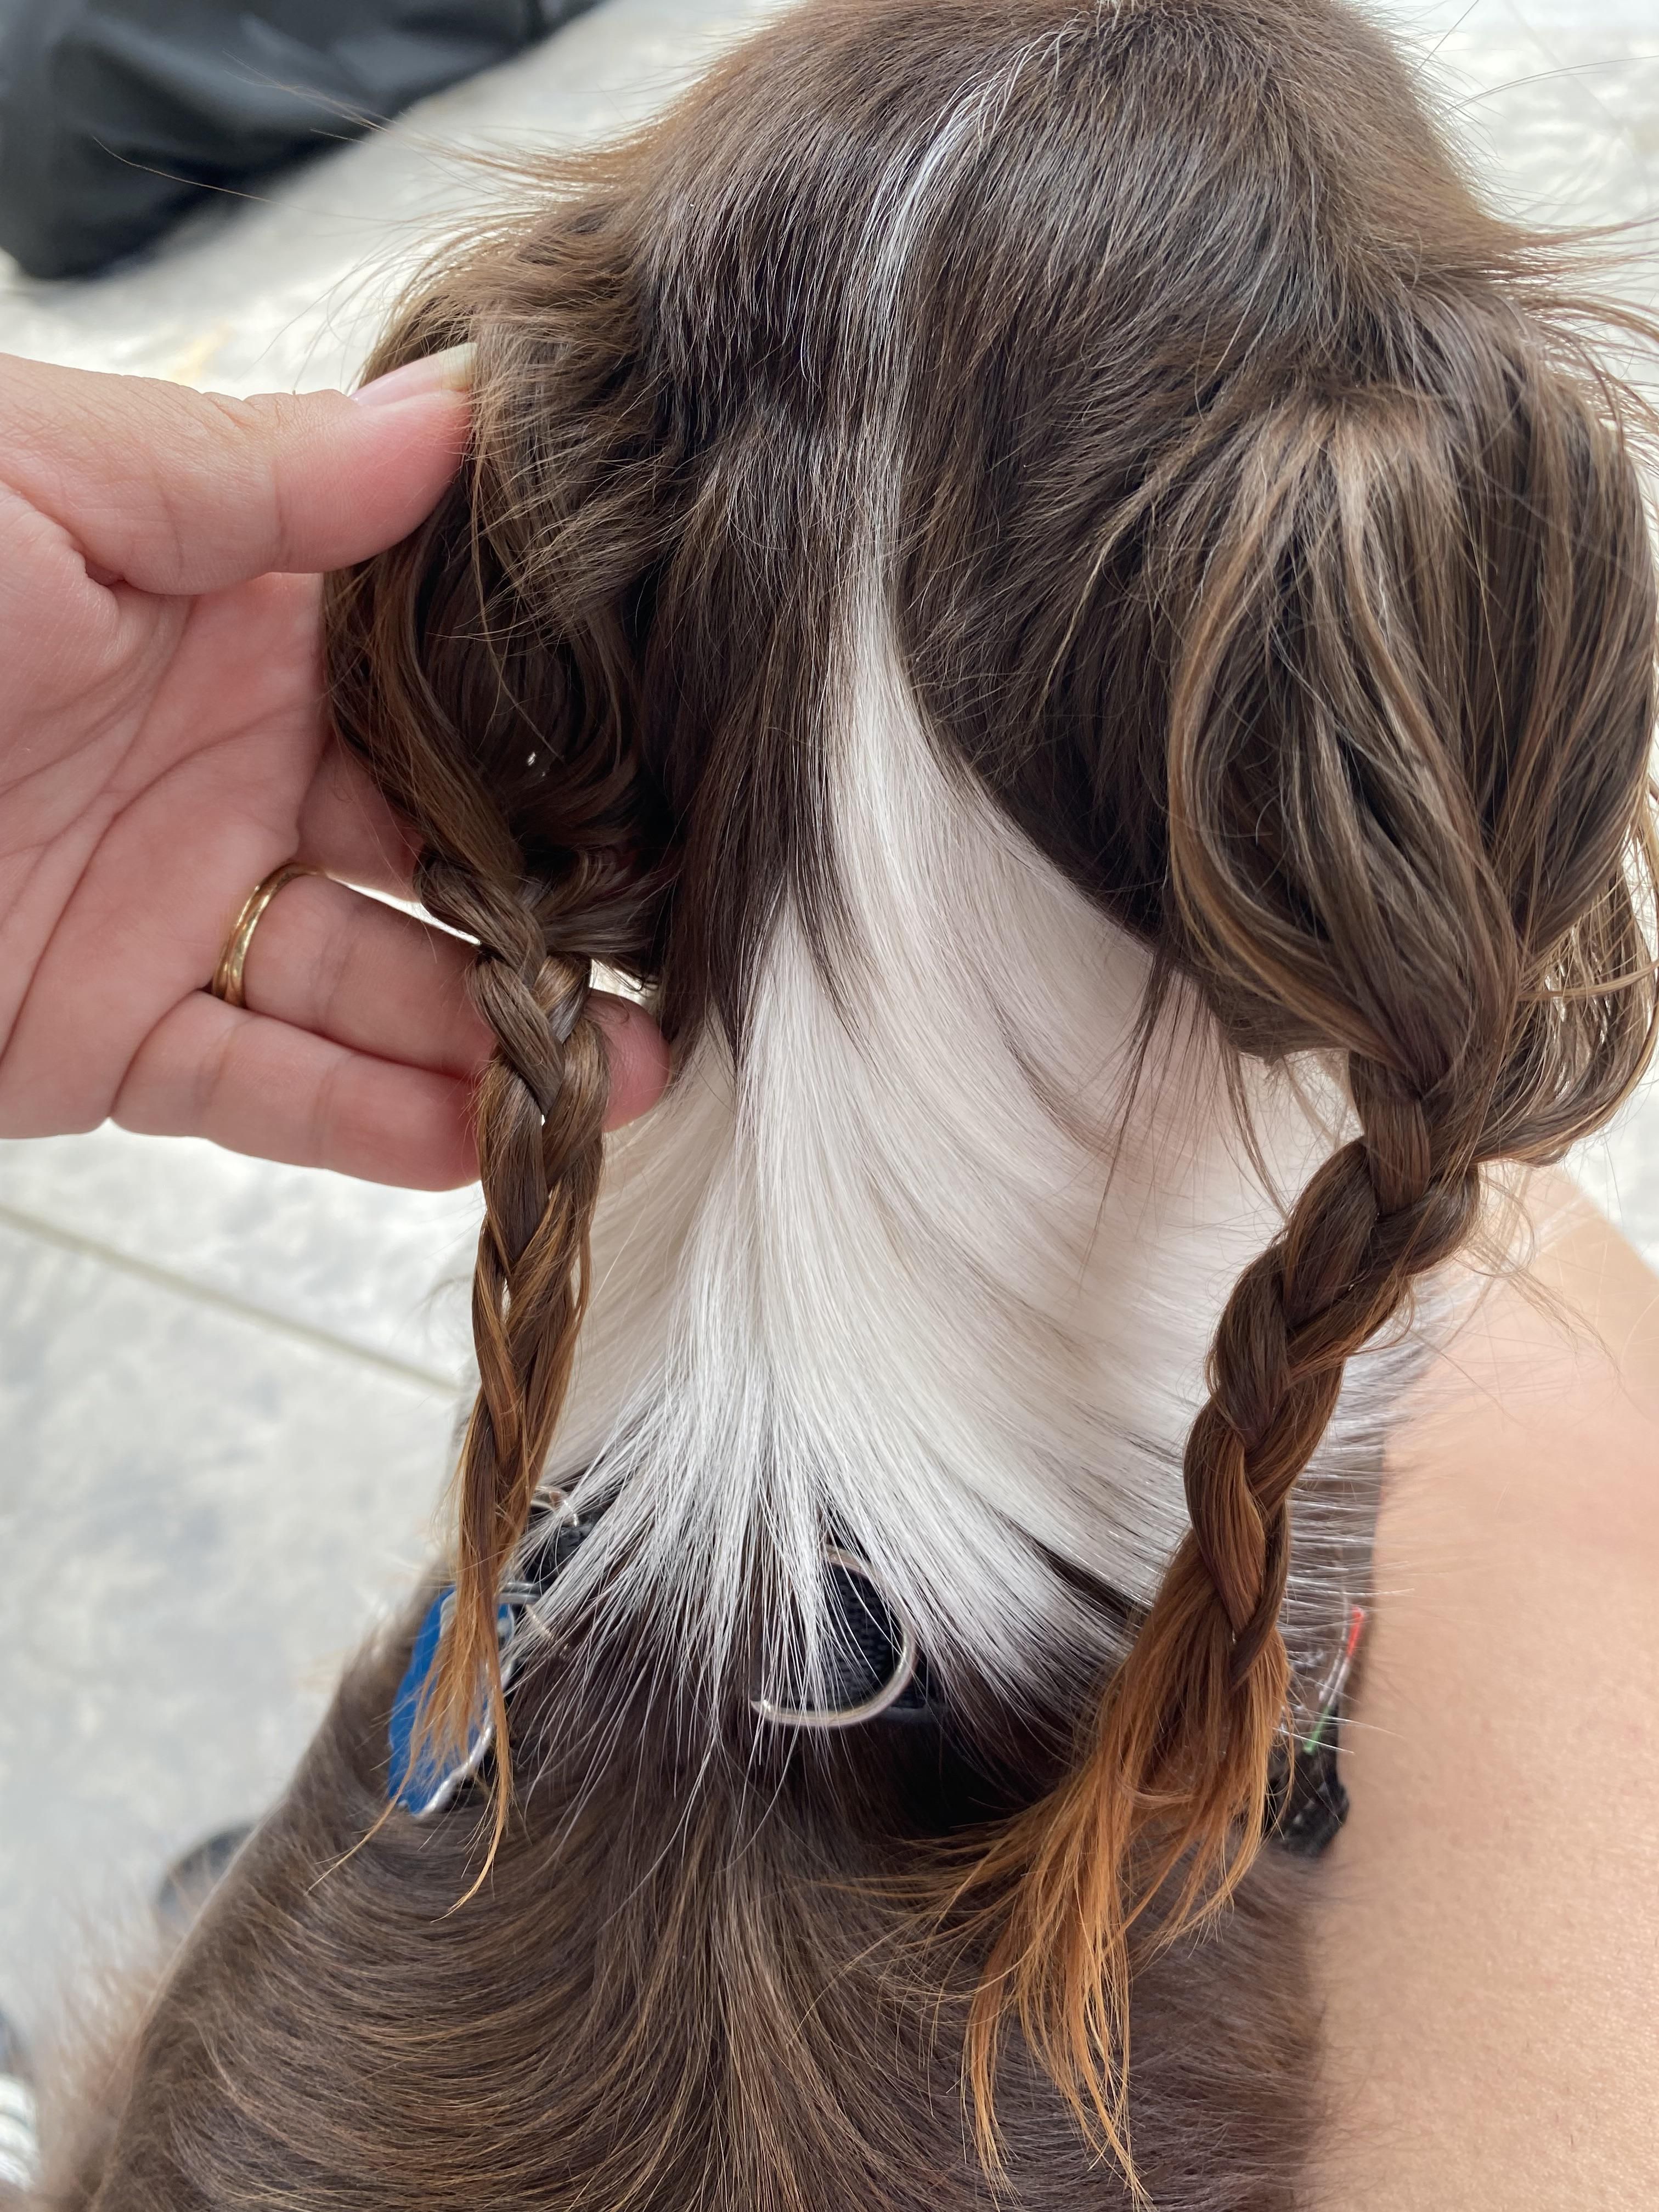 I’m dogsitting and got bored so I braided the dogs long ear hair